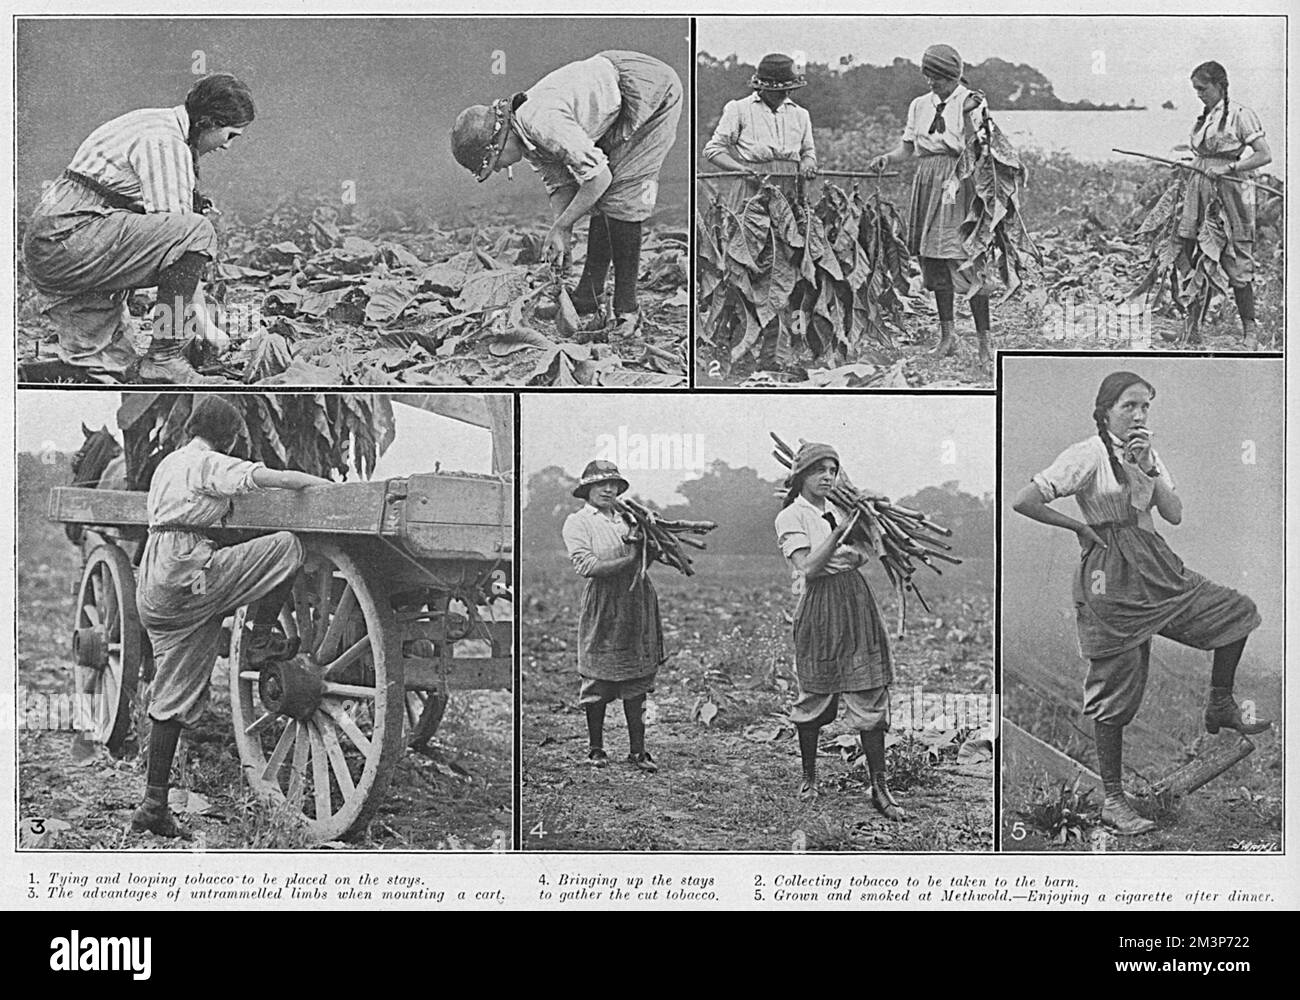 Women workers gathering the harvest on the tobacco farm at Methwold, Norfolk in 1915.  Picture 1 shows them tying and looping tobacco to be placed on stays, 2 shows them collecting tobacco to be taken to the barn, 3, 'the advantages of untrammelled limbs when mounting a cart', alluding to the breeches worn, 4, bringing the stays to gather the tobacco and 5, Grown and smoked in Methwold, a girl enjoys a cigarette after dinner.       Date: 1915 Stock Photo